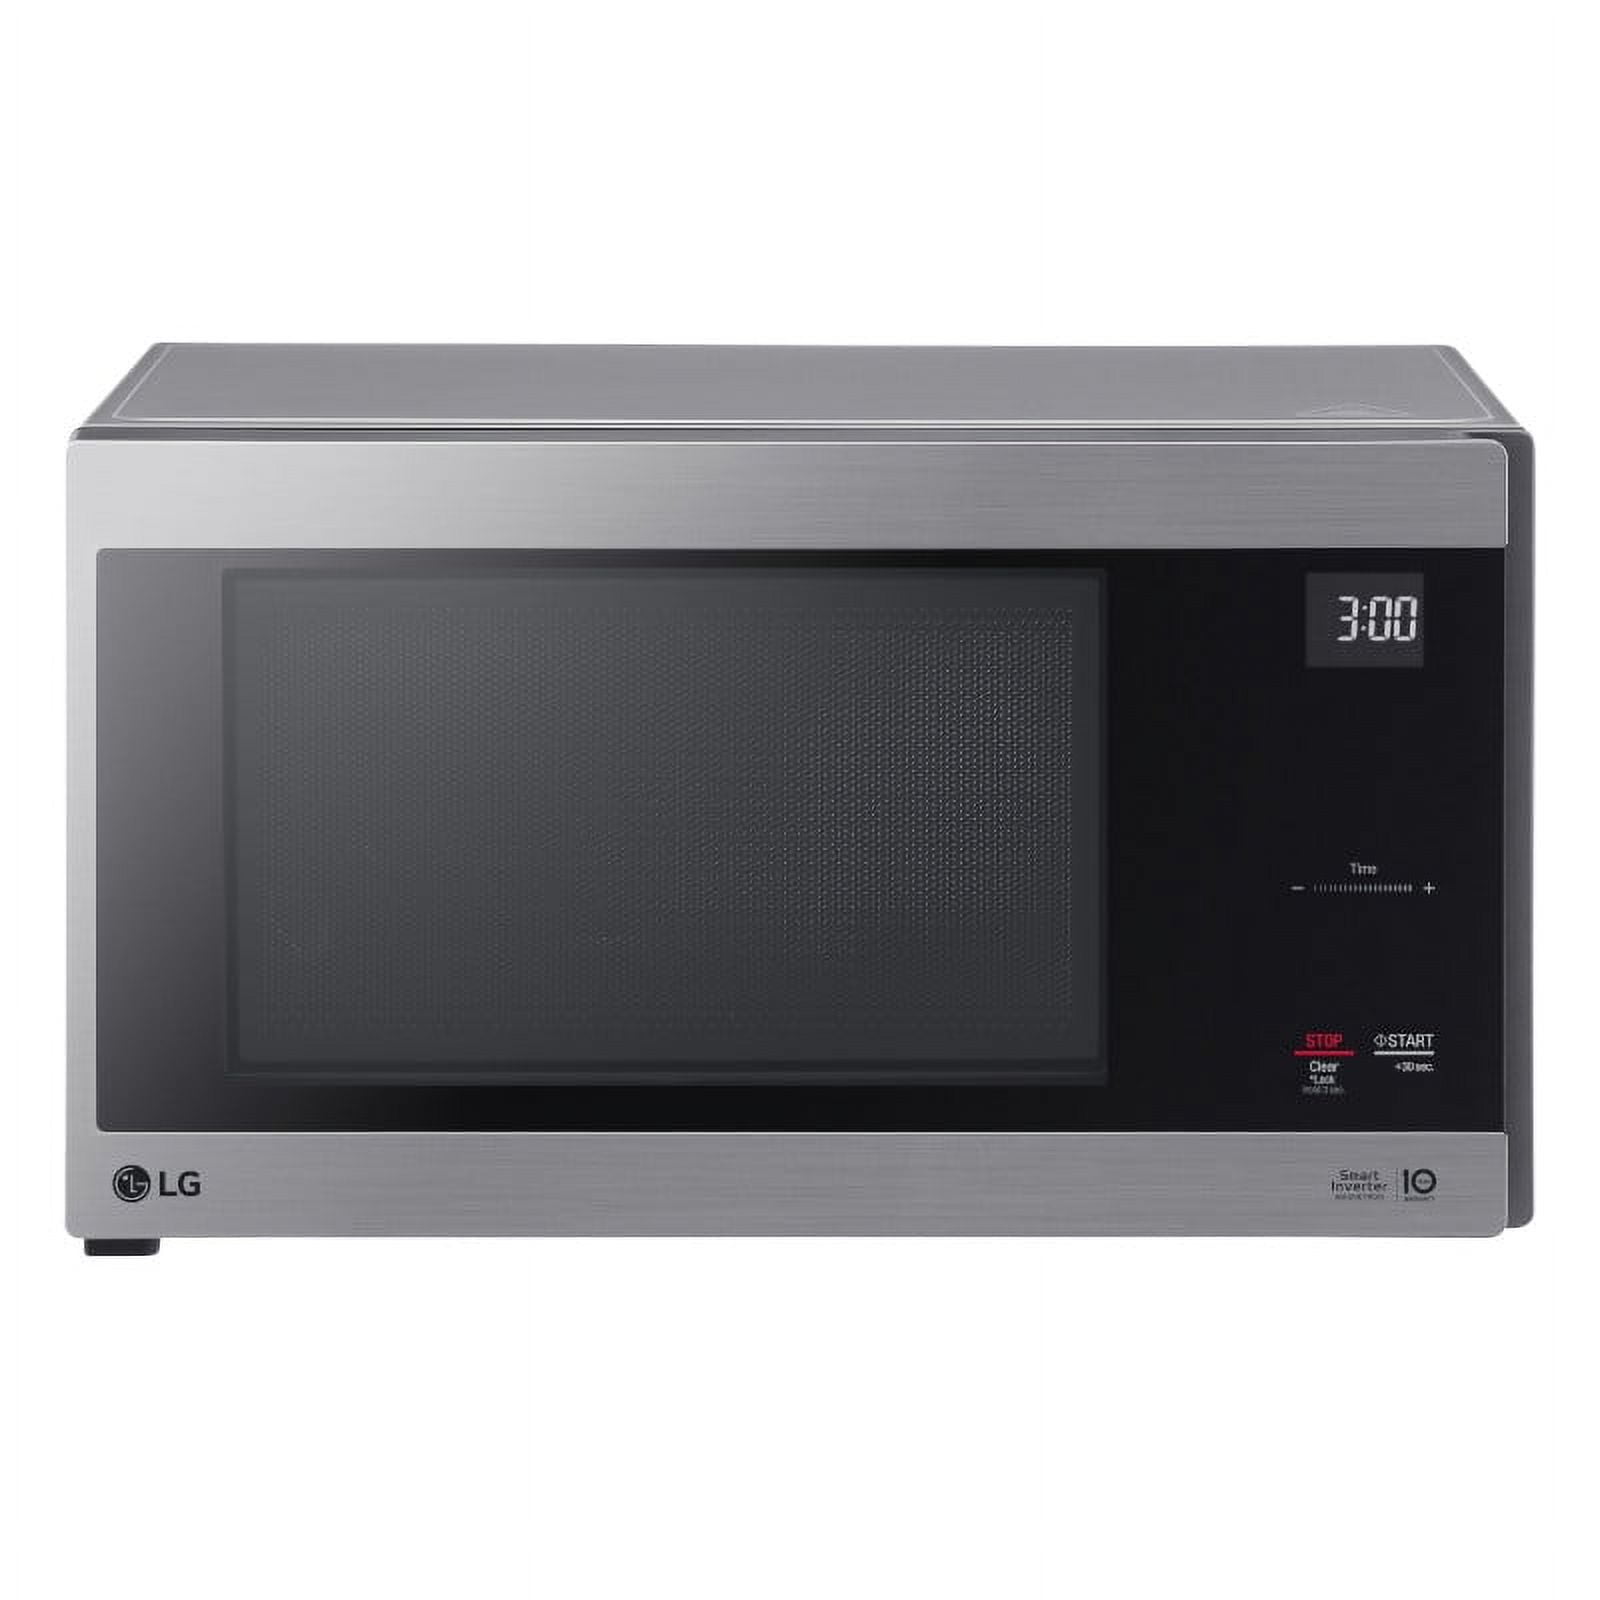 LG Neo Chef 1.5 cu. ft. Countertop Microwave Oven,  Watts, Stainless  Steel